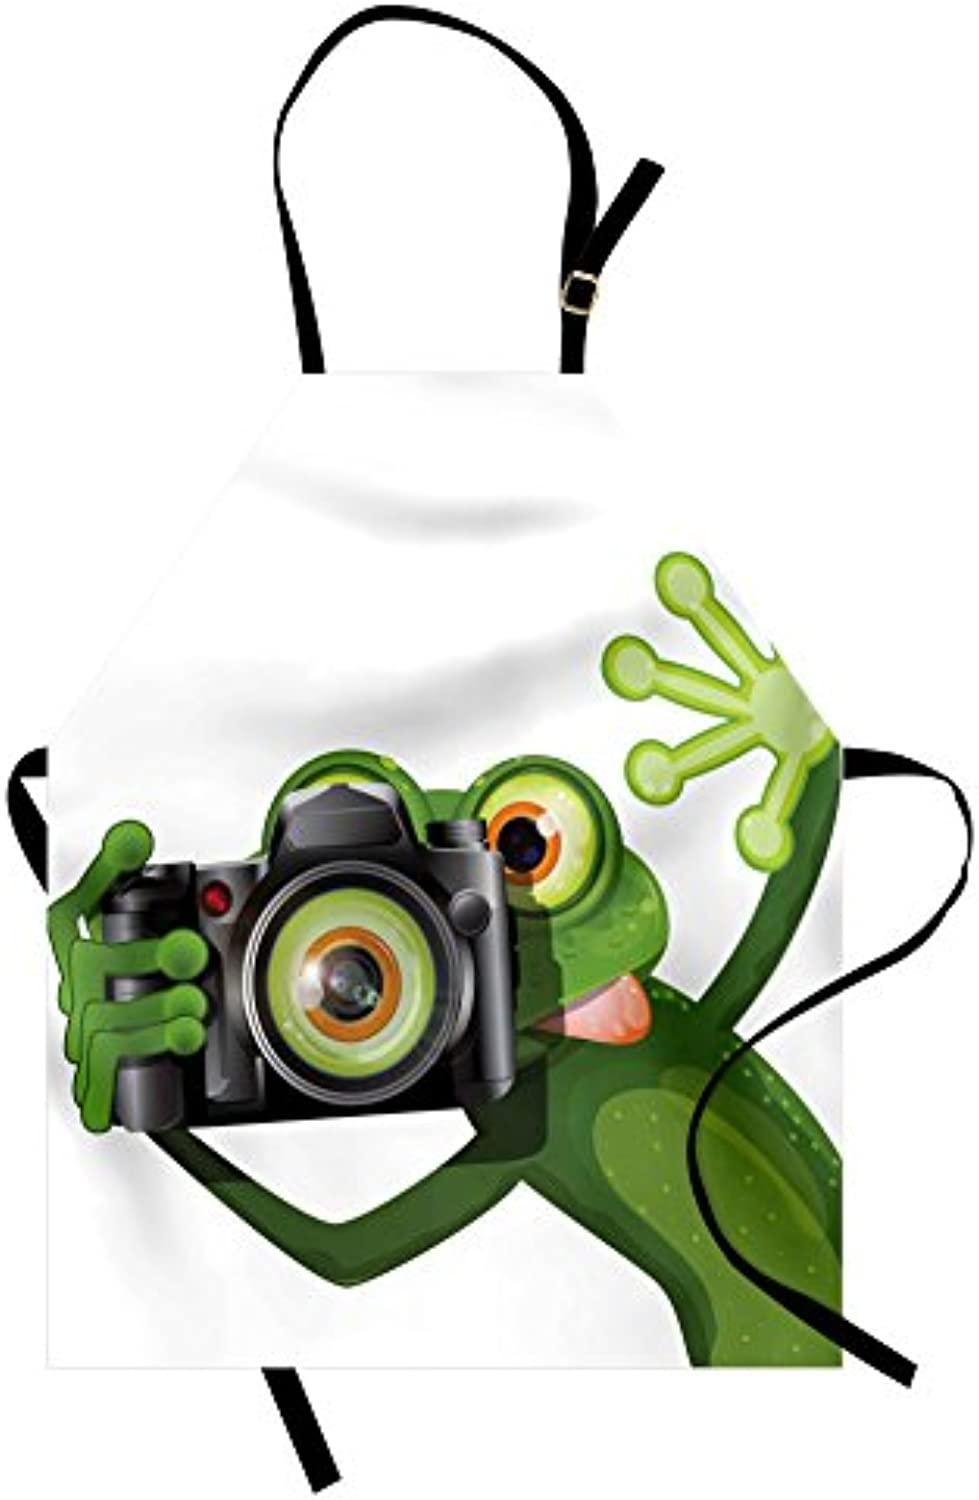 Granbey Animal Apron  Photographer Merry Frog Taking a Picture His Camera Funny Animal Pattern  Unisex Kitchen Bib with Adjustable Neck for Cooking Gardening  Adult Size  Green Black